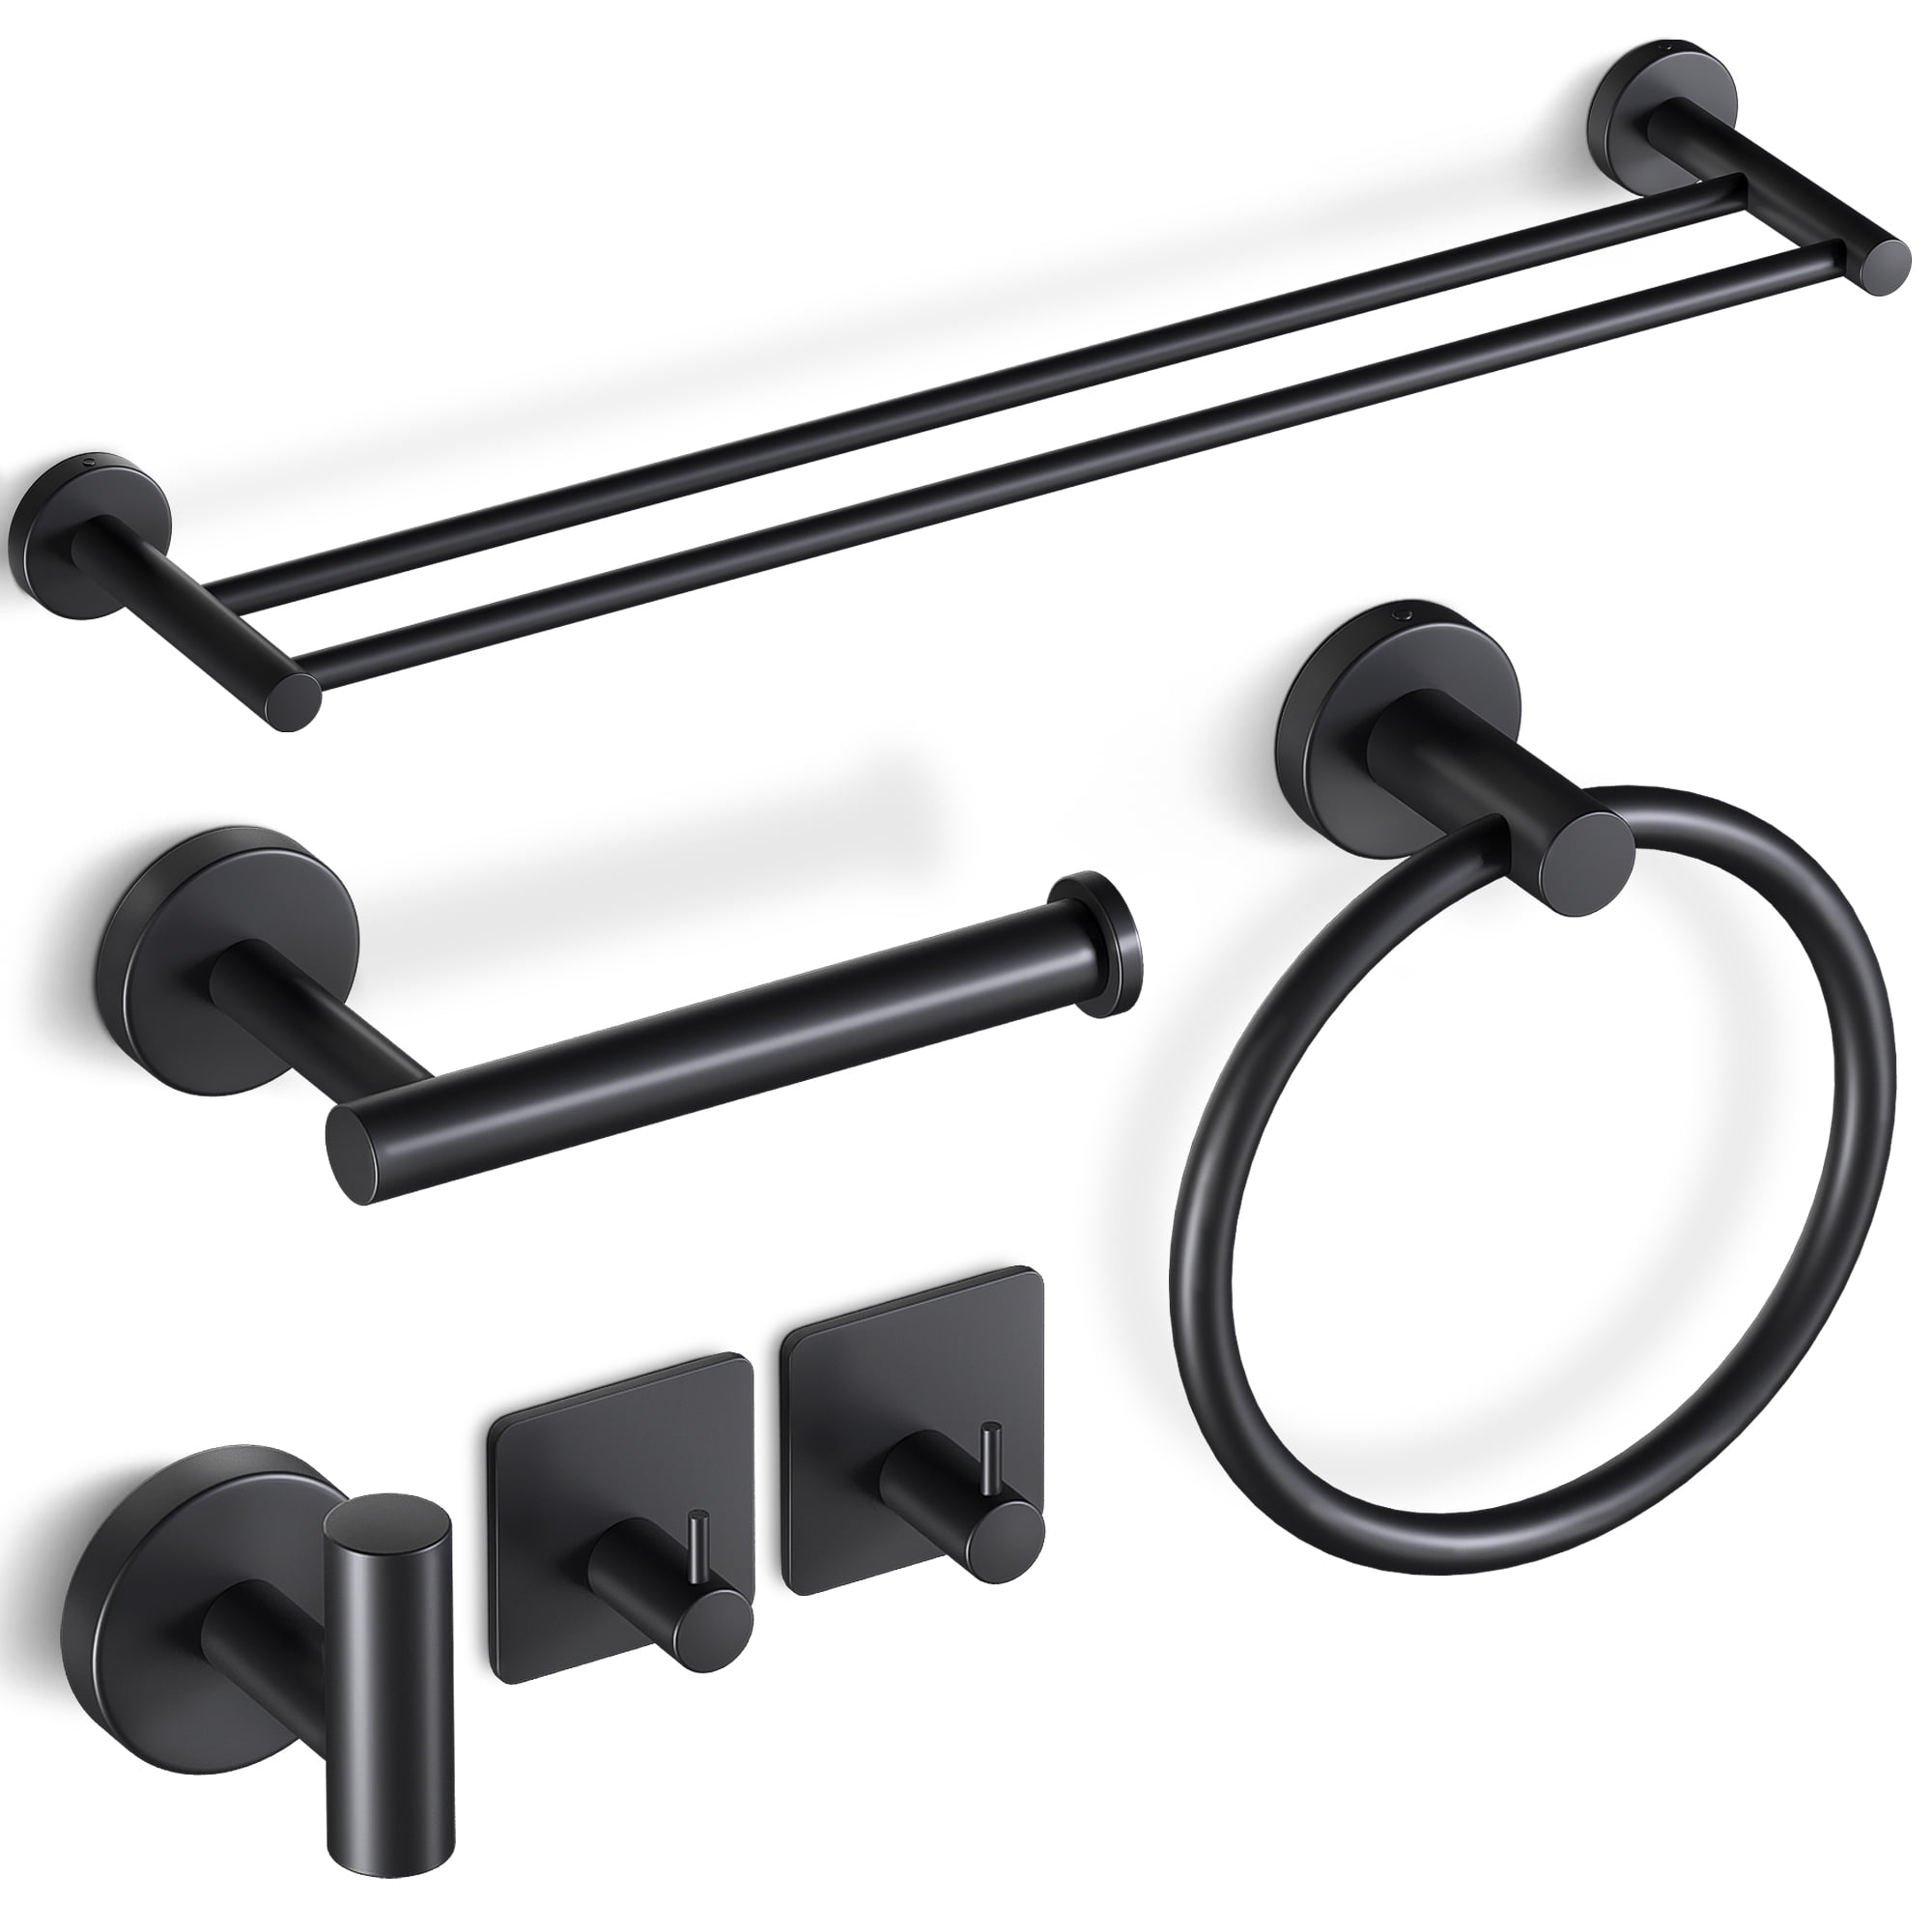 Franklin Brass Kinla 5-Piece Bath Hardware,includes 24 inches towel bar And More 